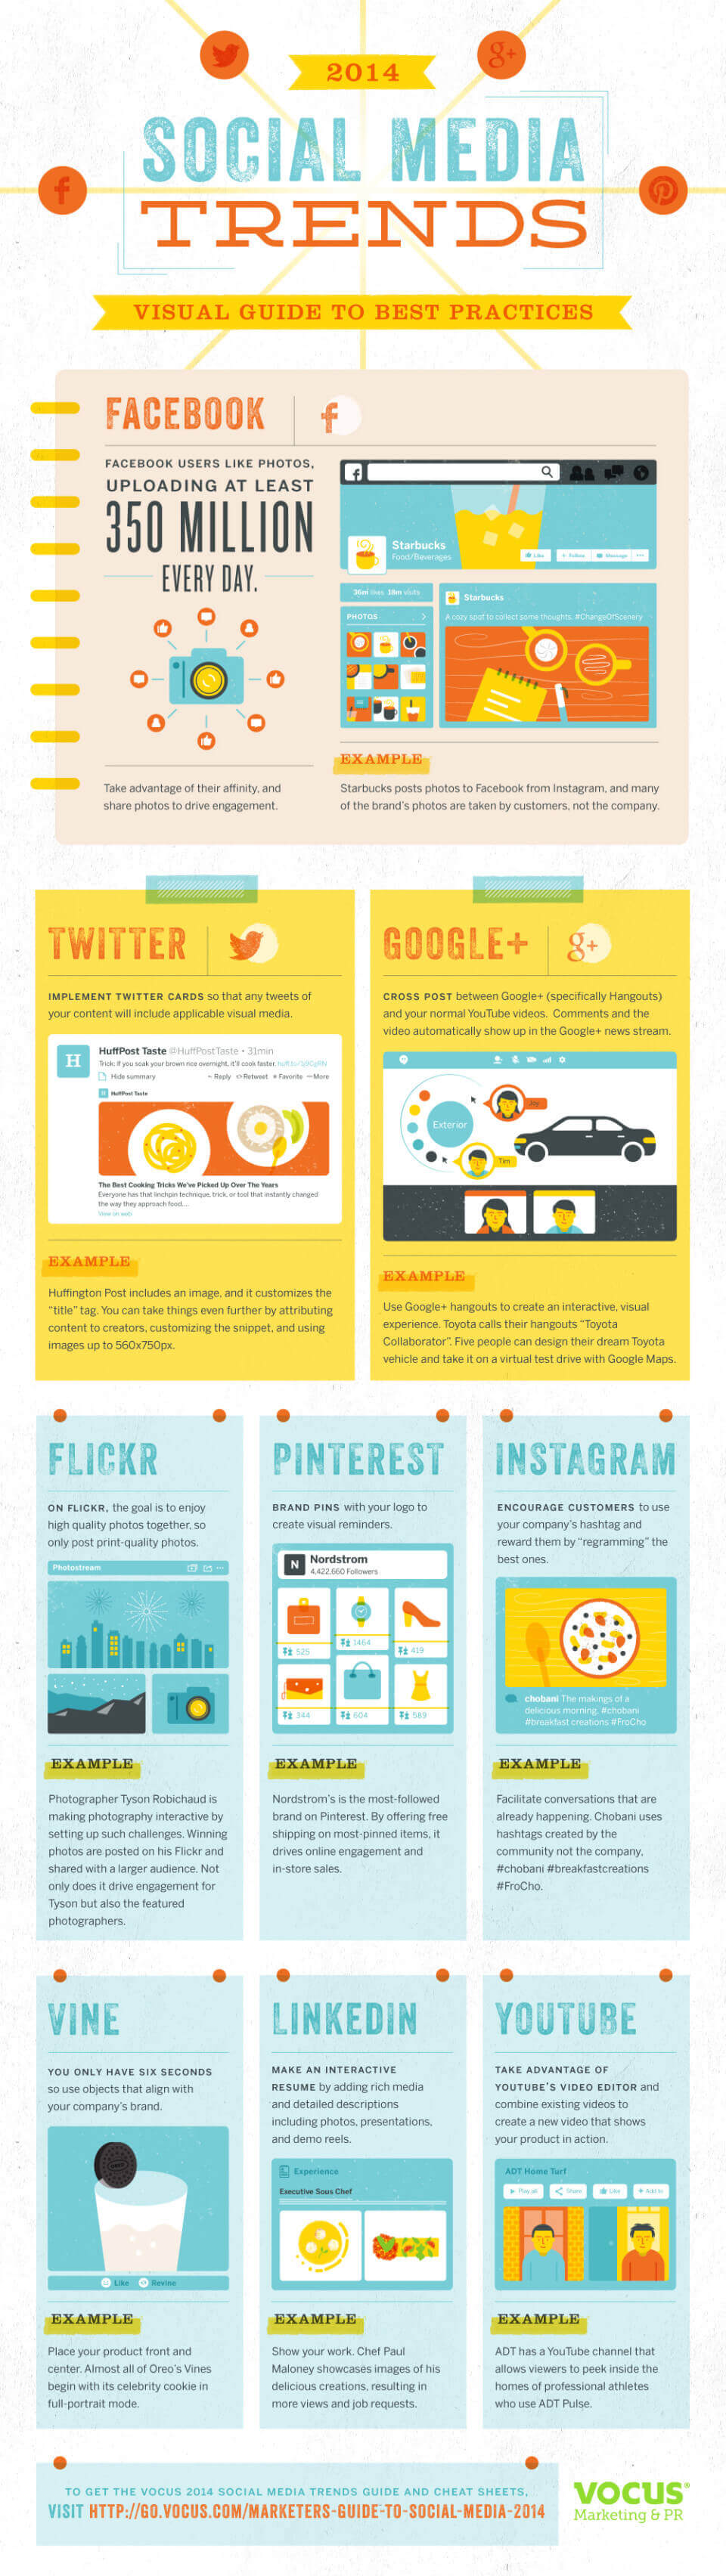 2014 Social Media Best Practices Visual Guide